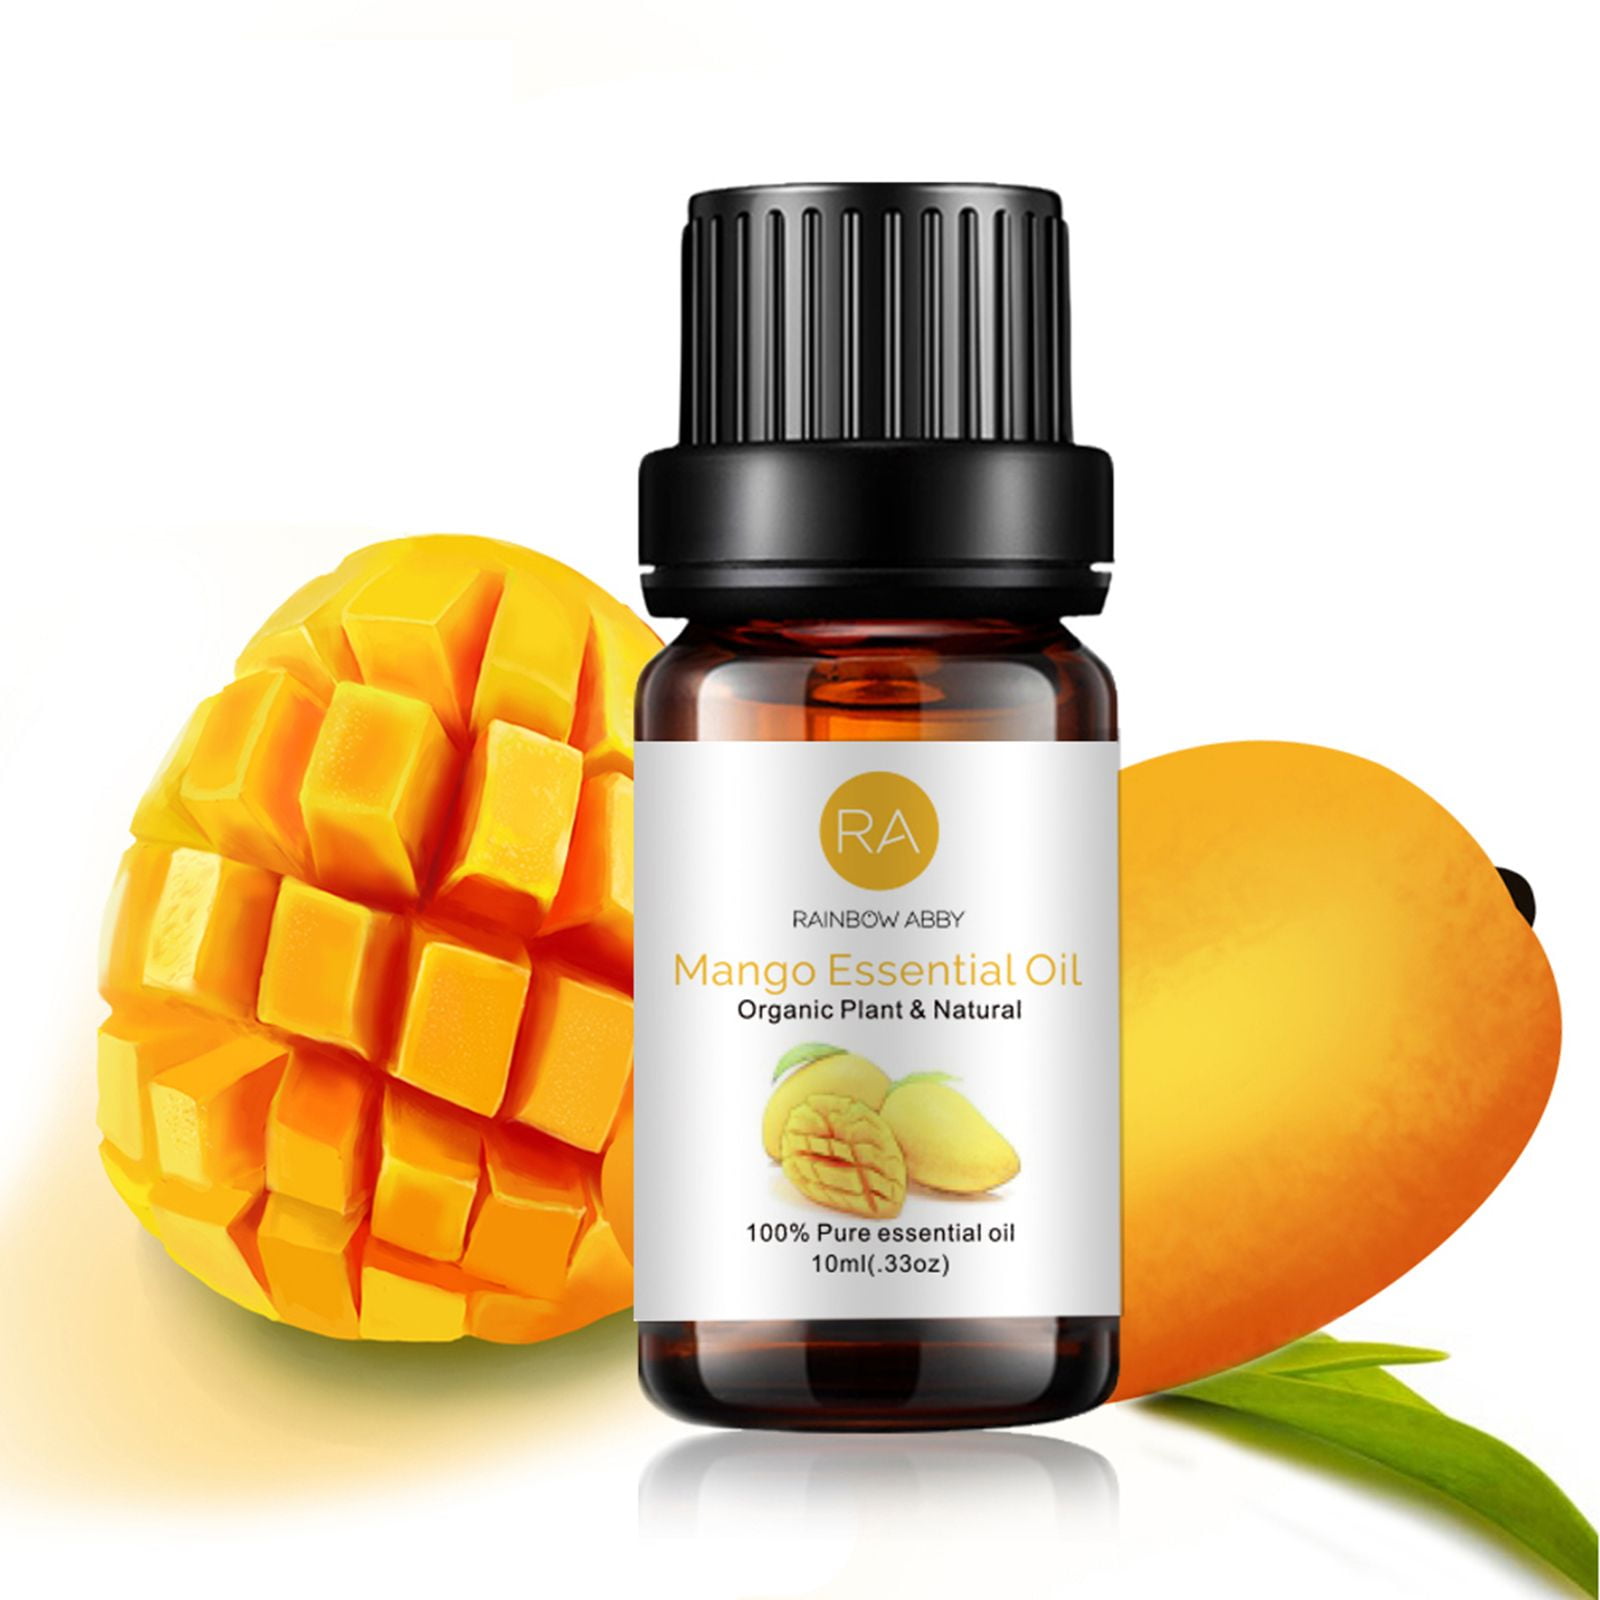 Mango Essential Oil Organic Plant Natural 100% Pure Mango Oil for  Diffuser,Cleaning,Home,Bedroom, Perfumes,Humidifier,Soap,Candles 2 Pack 10ml